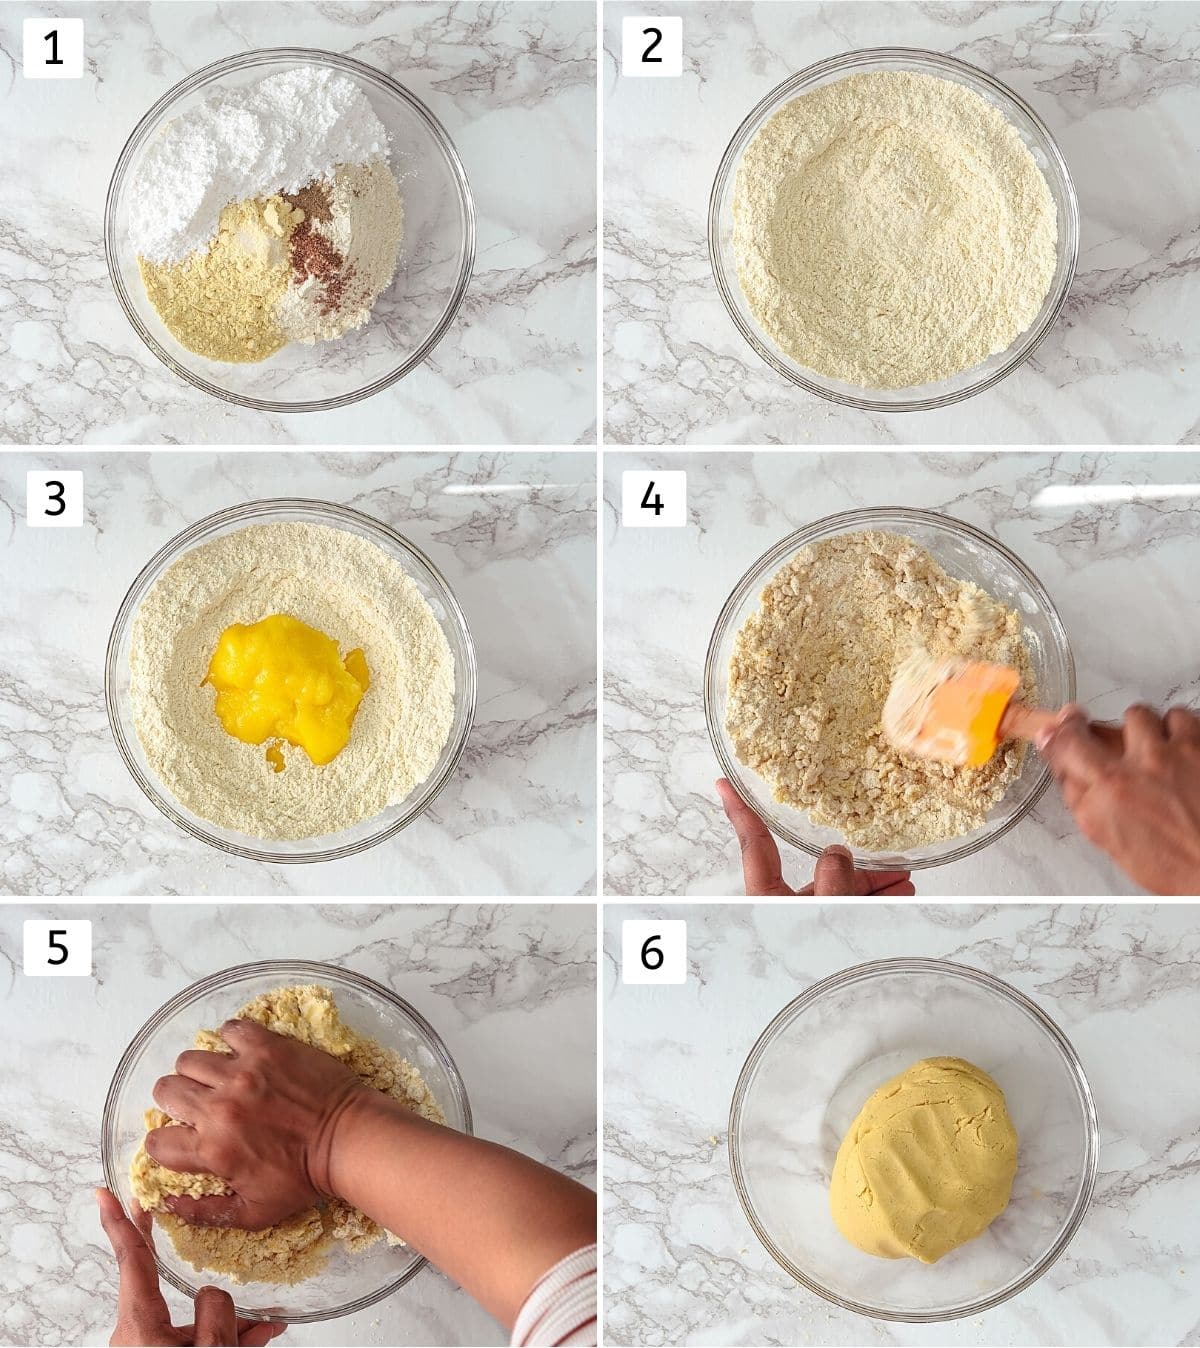 Collage of 6 steps showing mixing dry ingredients, adding ghee and kneading the dough.